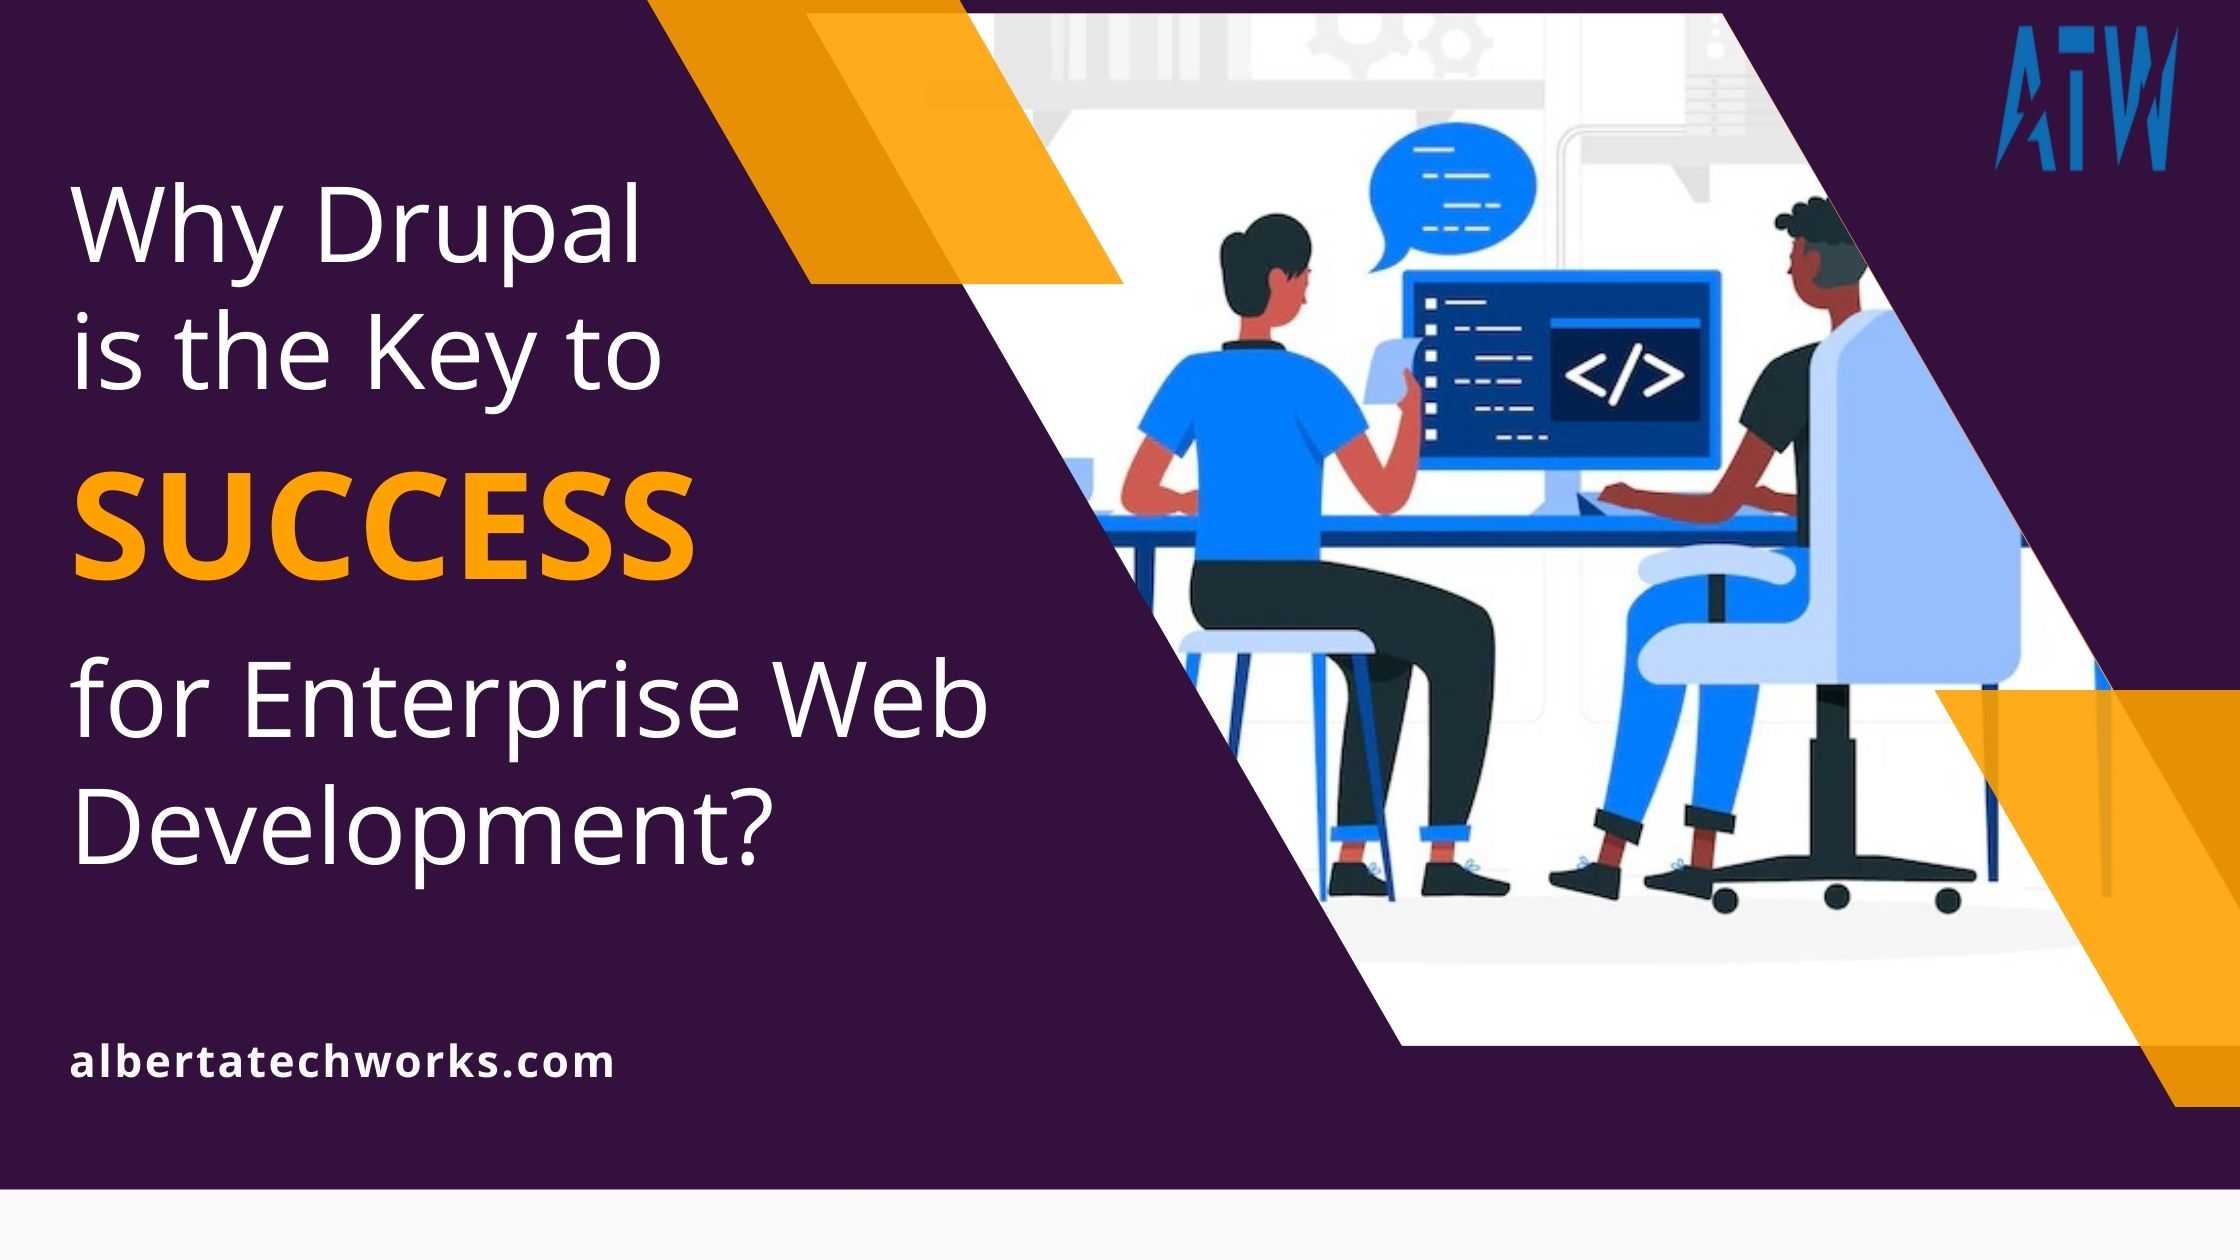 Why Drupal is the Key To Success for Enterprise Web Development